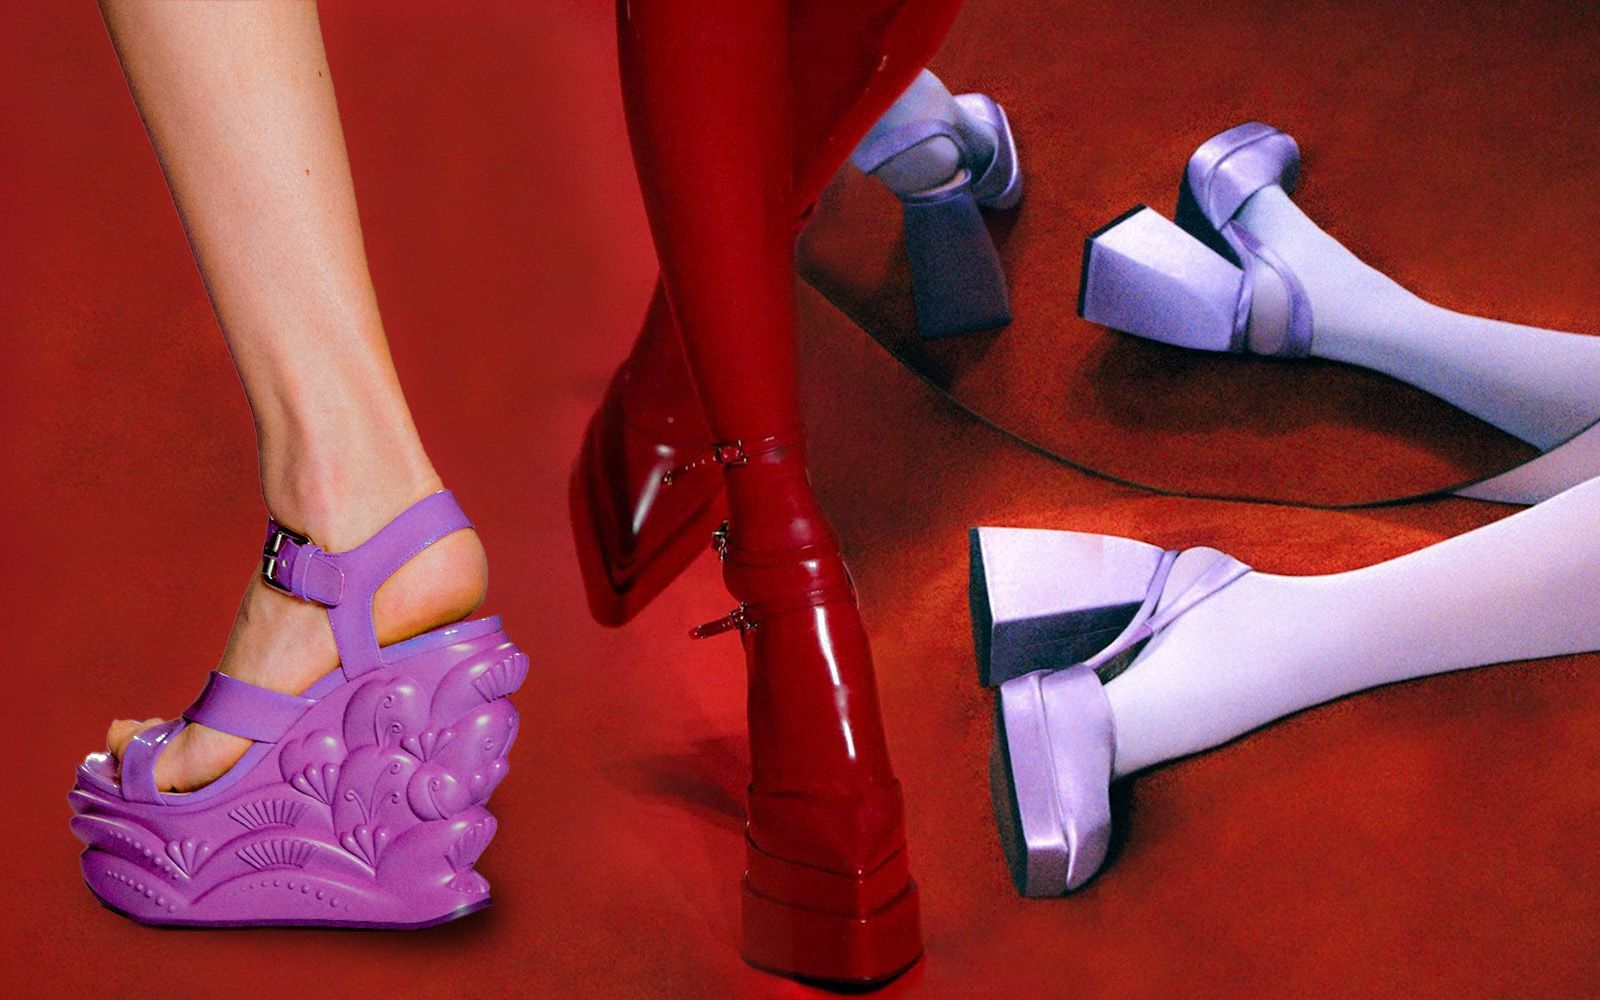 Platform shoes come back ruling the streets in SS22